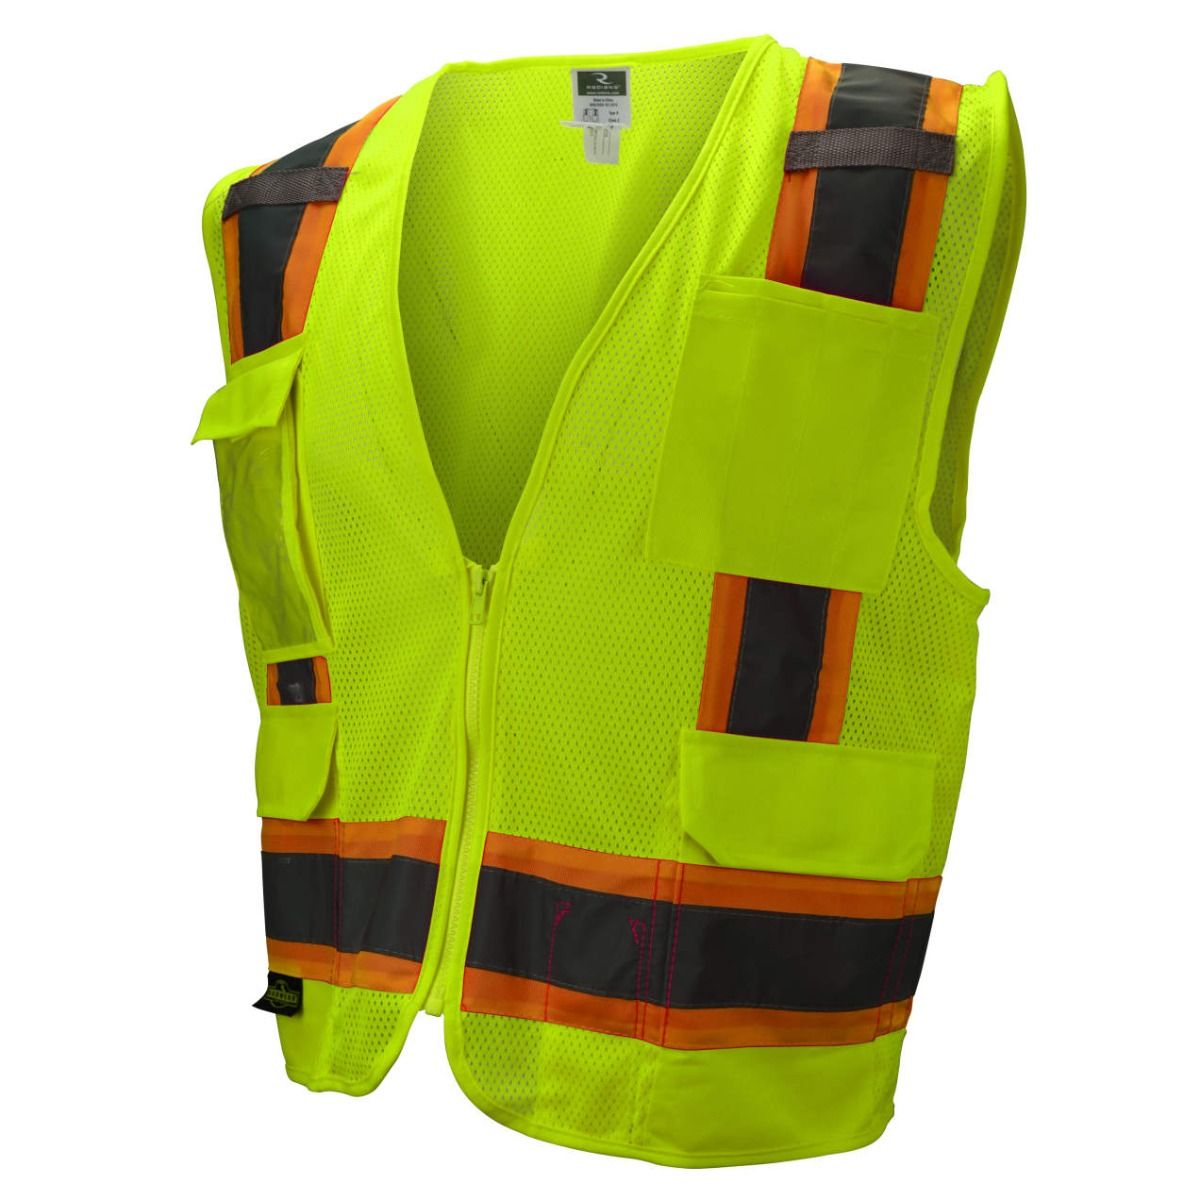 FrogWear HV High-Visibility Mesh Polyester Surveyors Safety Vest GLO-079 3X-Large Global Glove & Safety Manufacturing GLO-079-3XL 